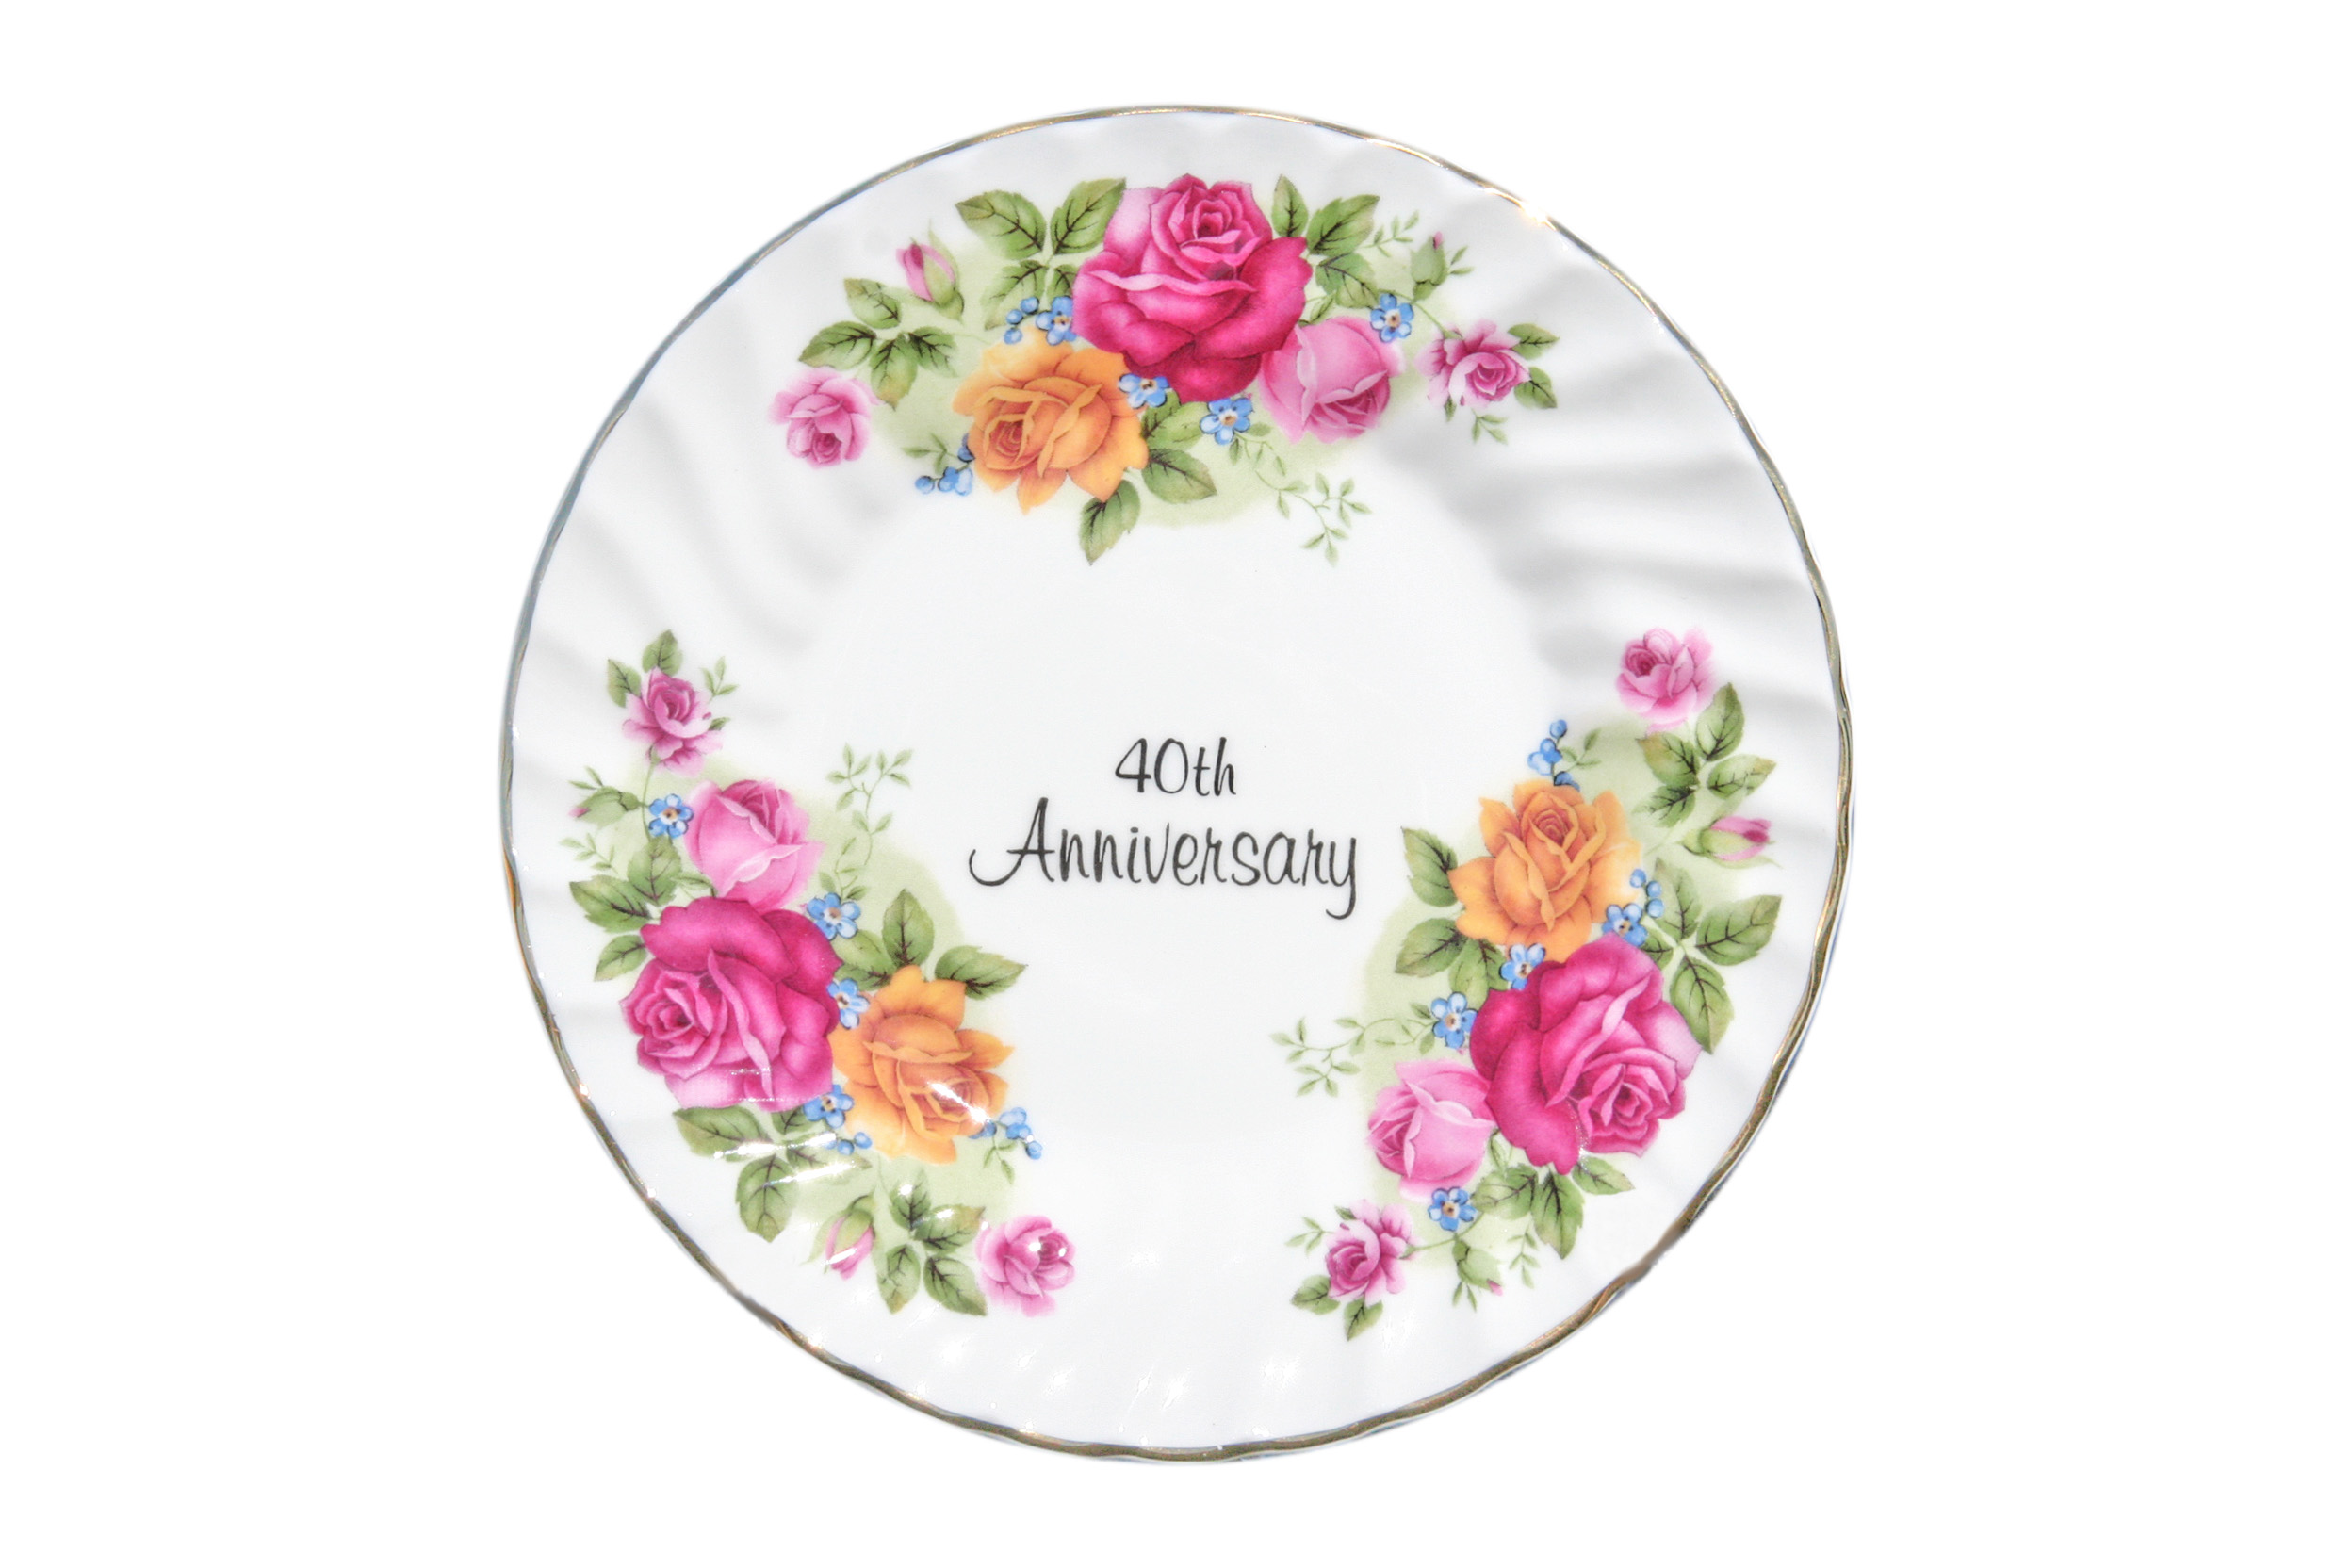 40th Anniversary Plate (6 inch) with stand